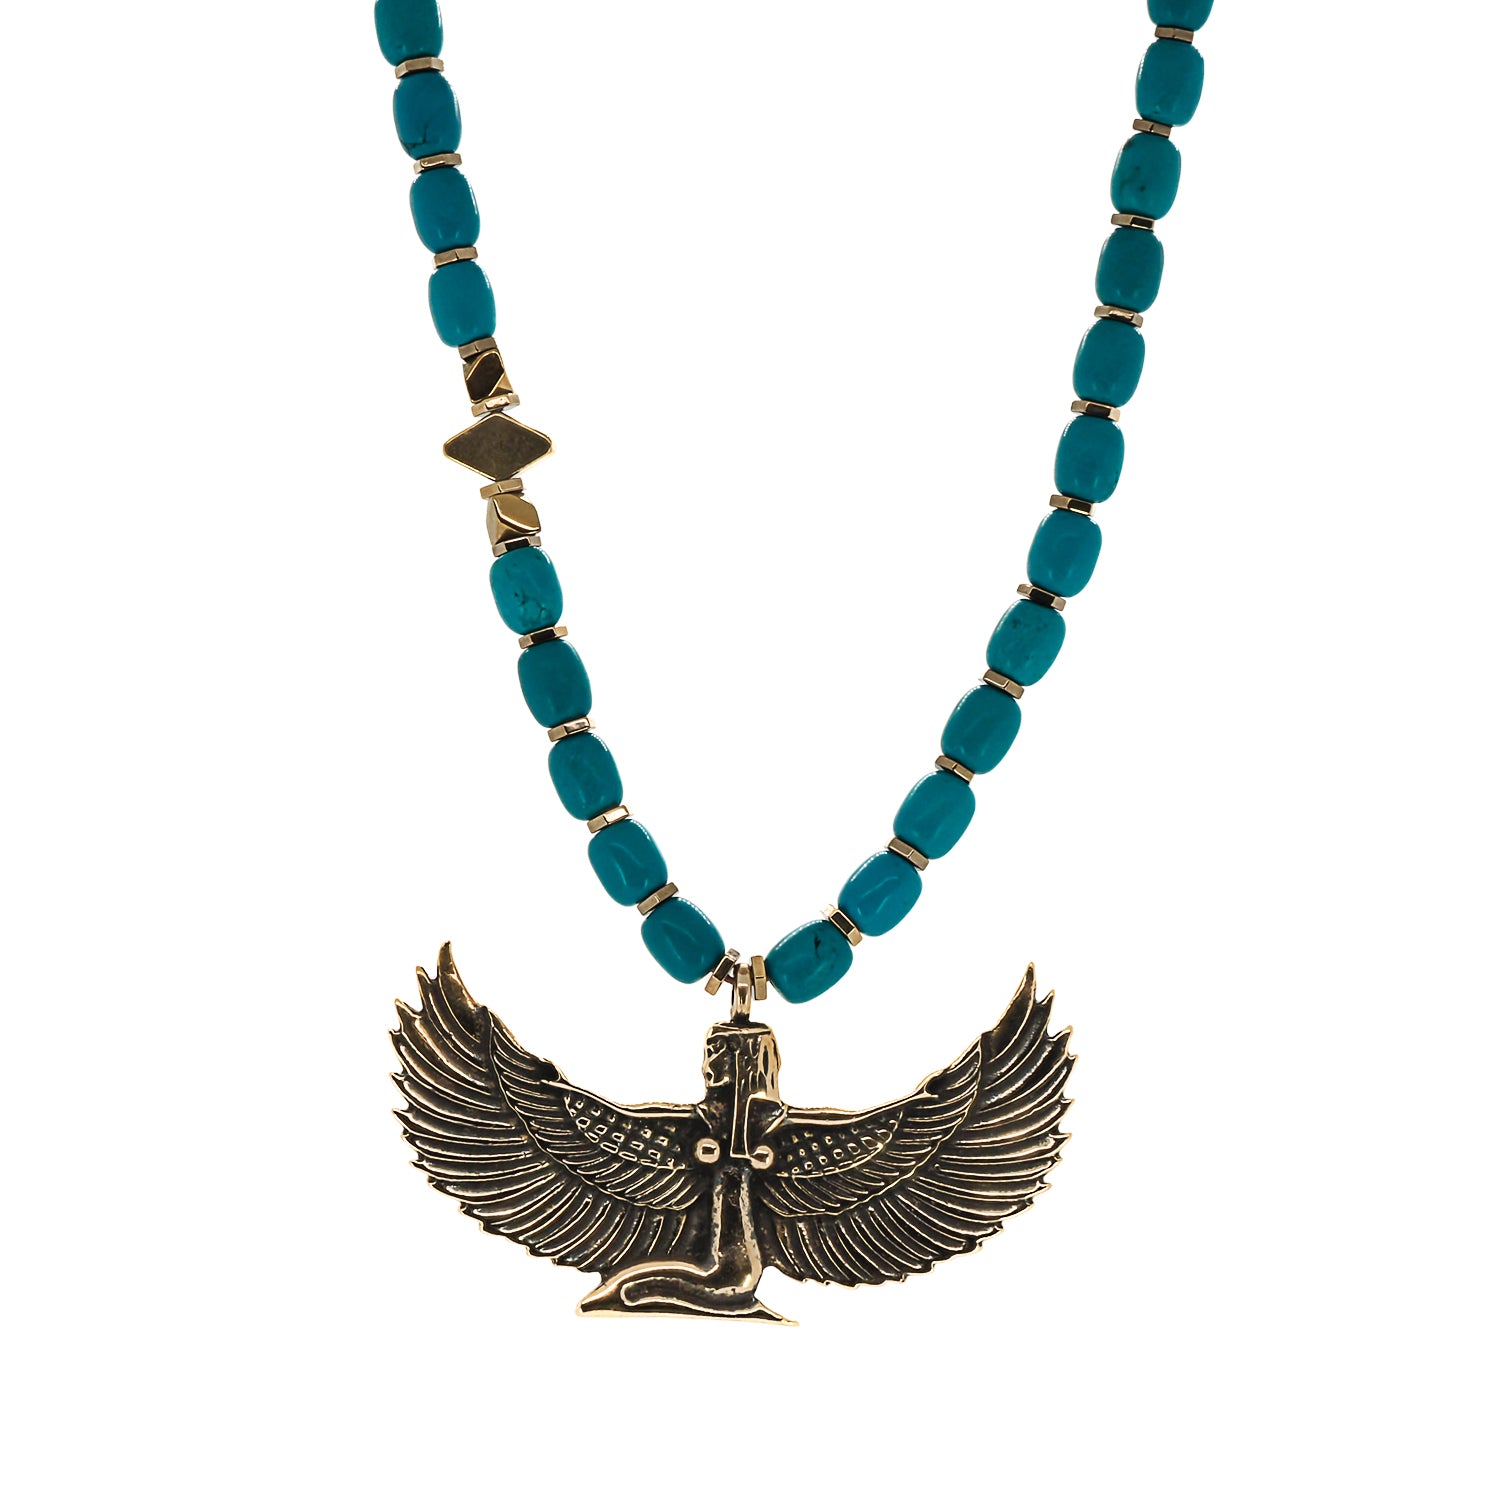 Turquoise Goddess of Healing & Magic Isis Necklace - A harmonious fusion of gemstones and symbolism.